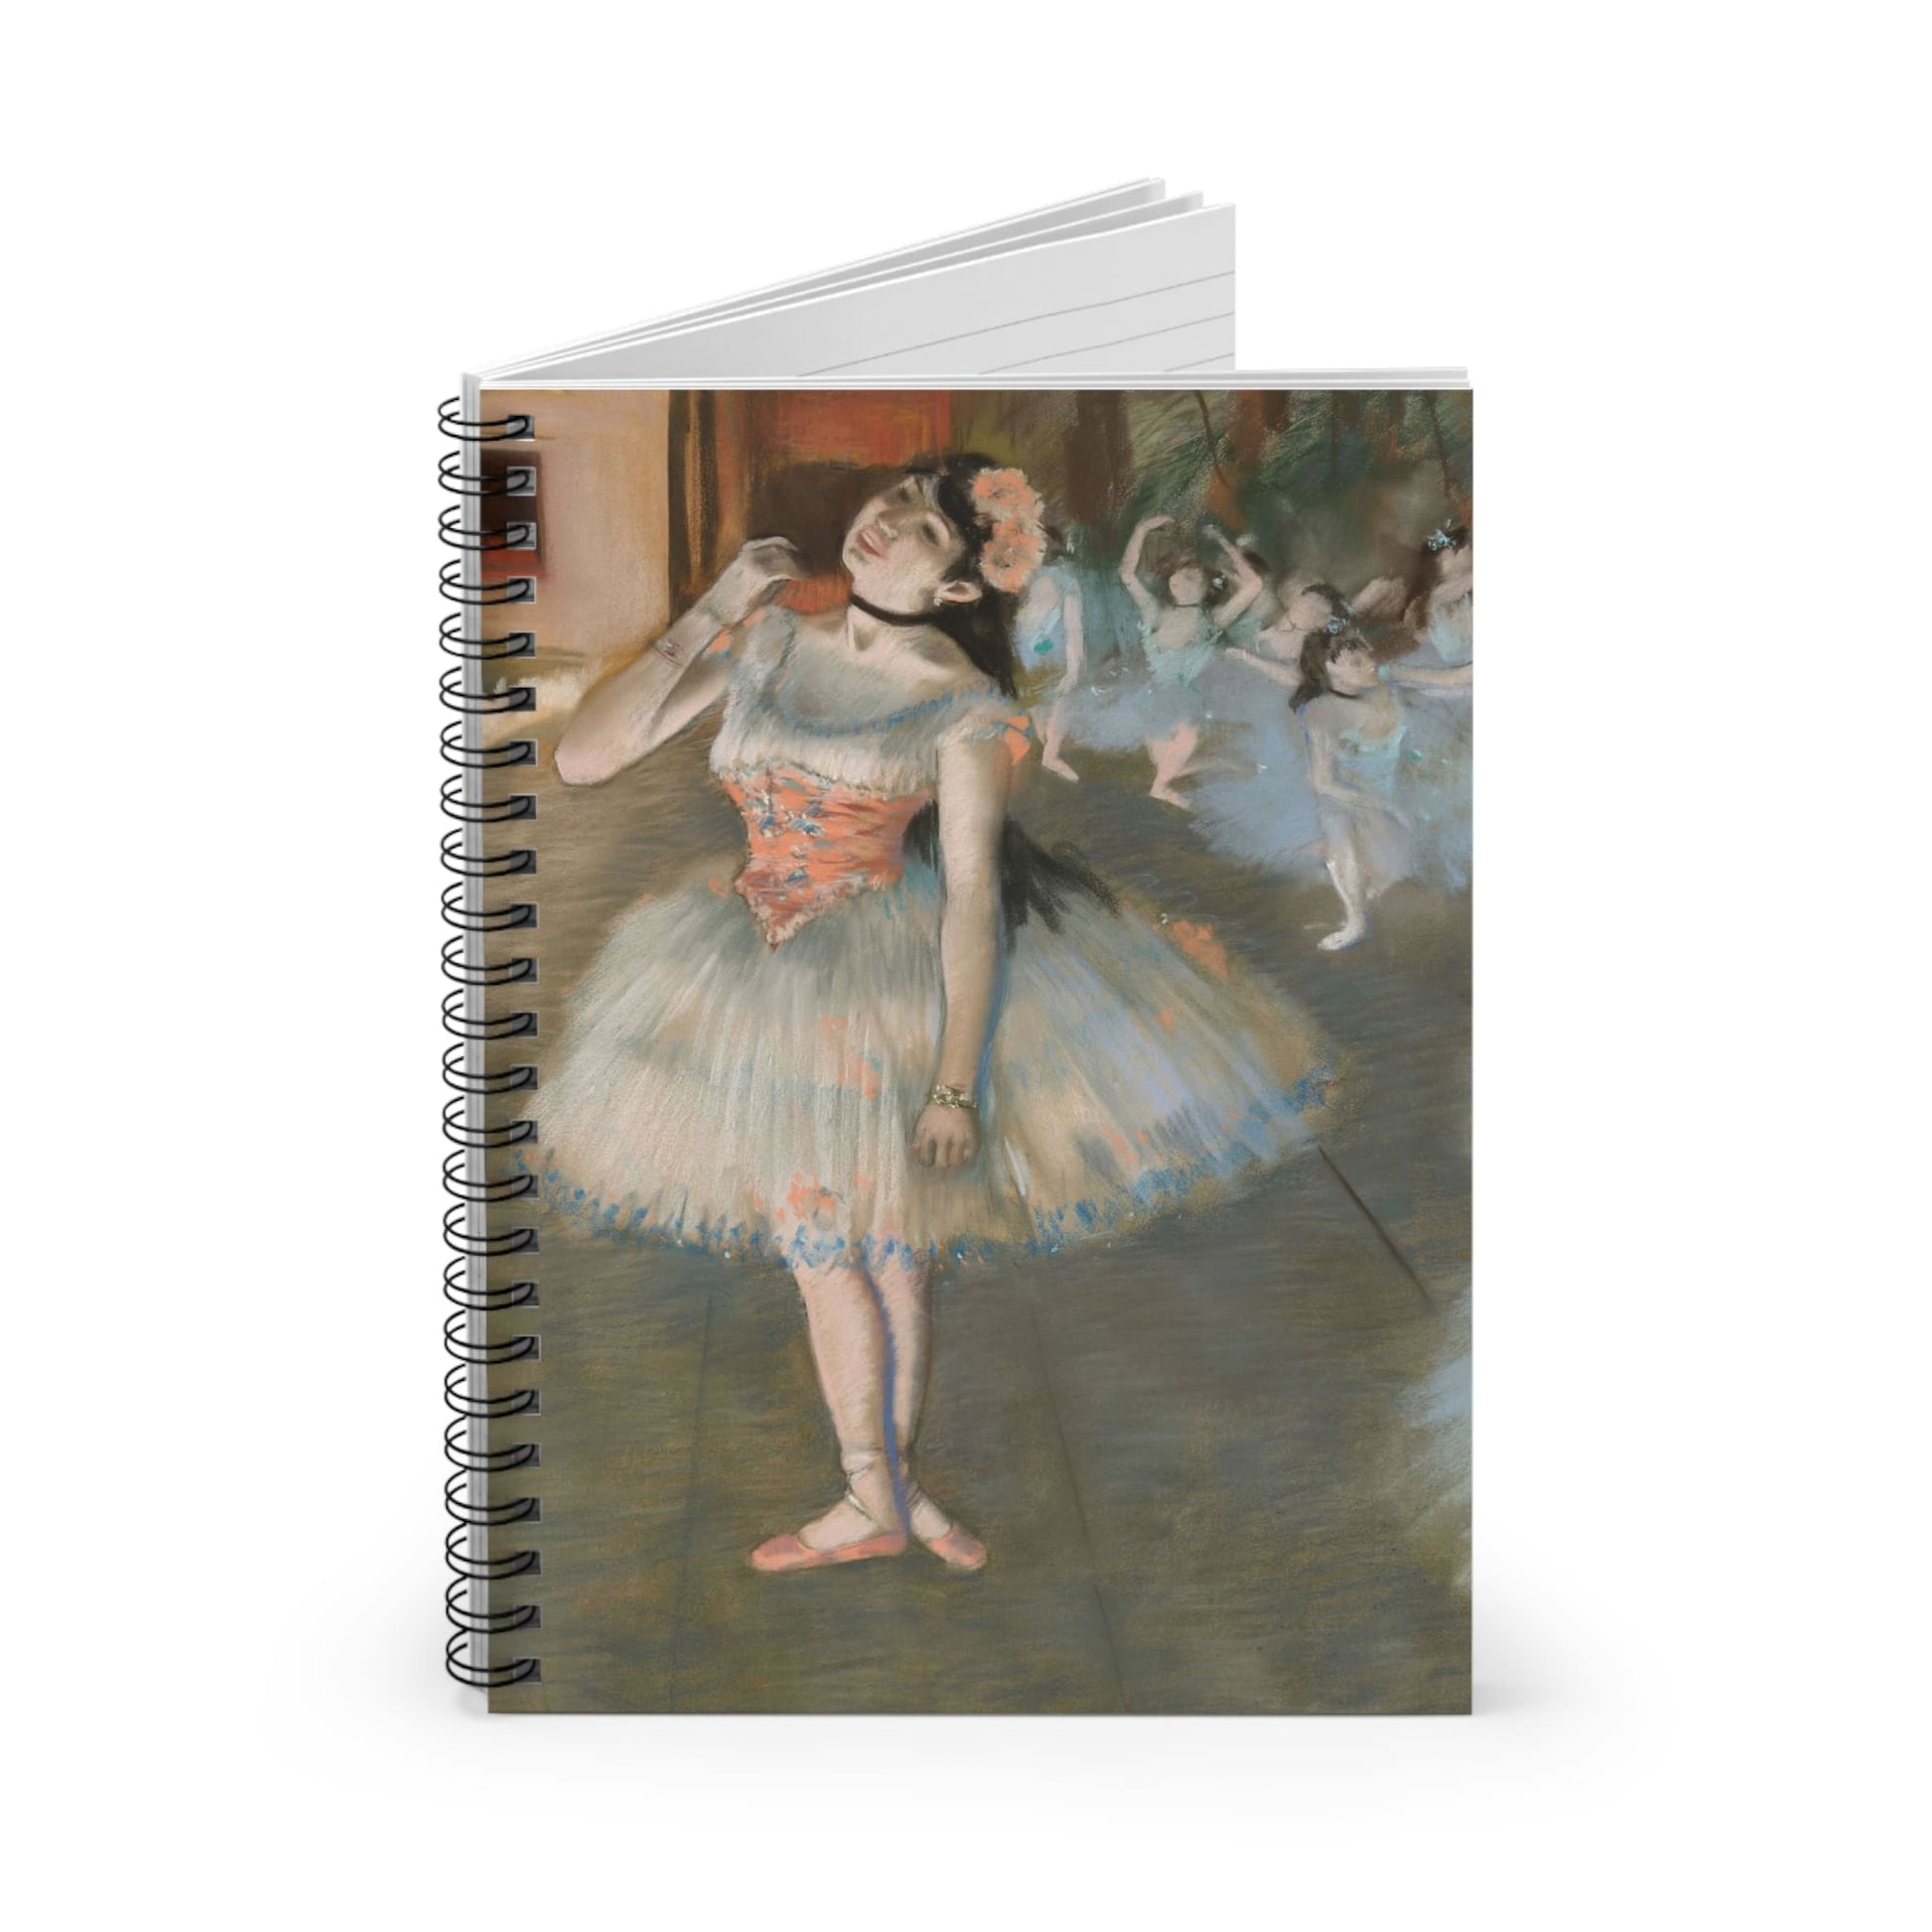 Ballerina Painting Spiral Notebook Standing up on White Desk